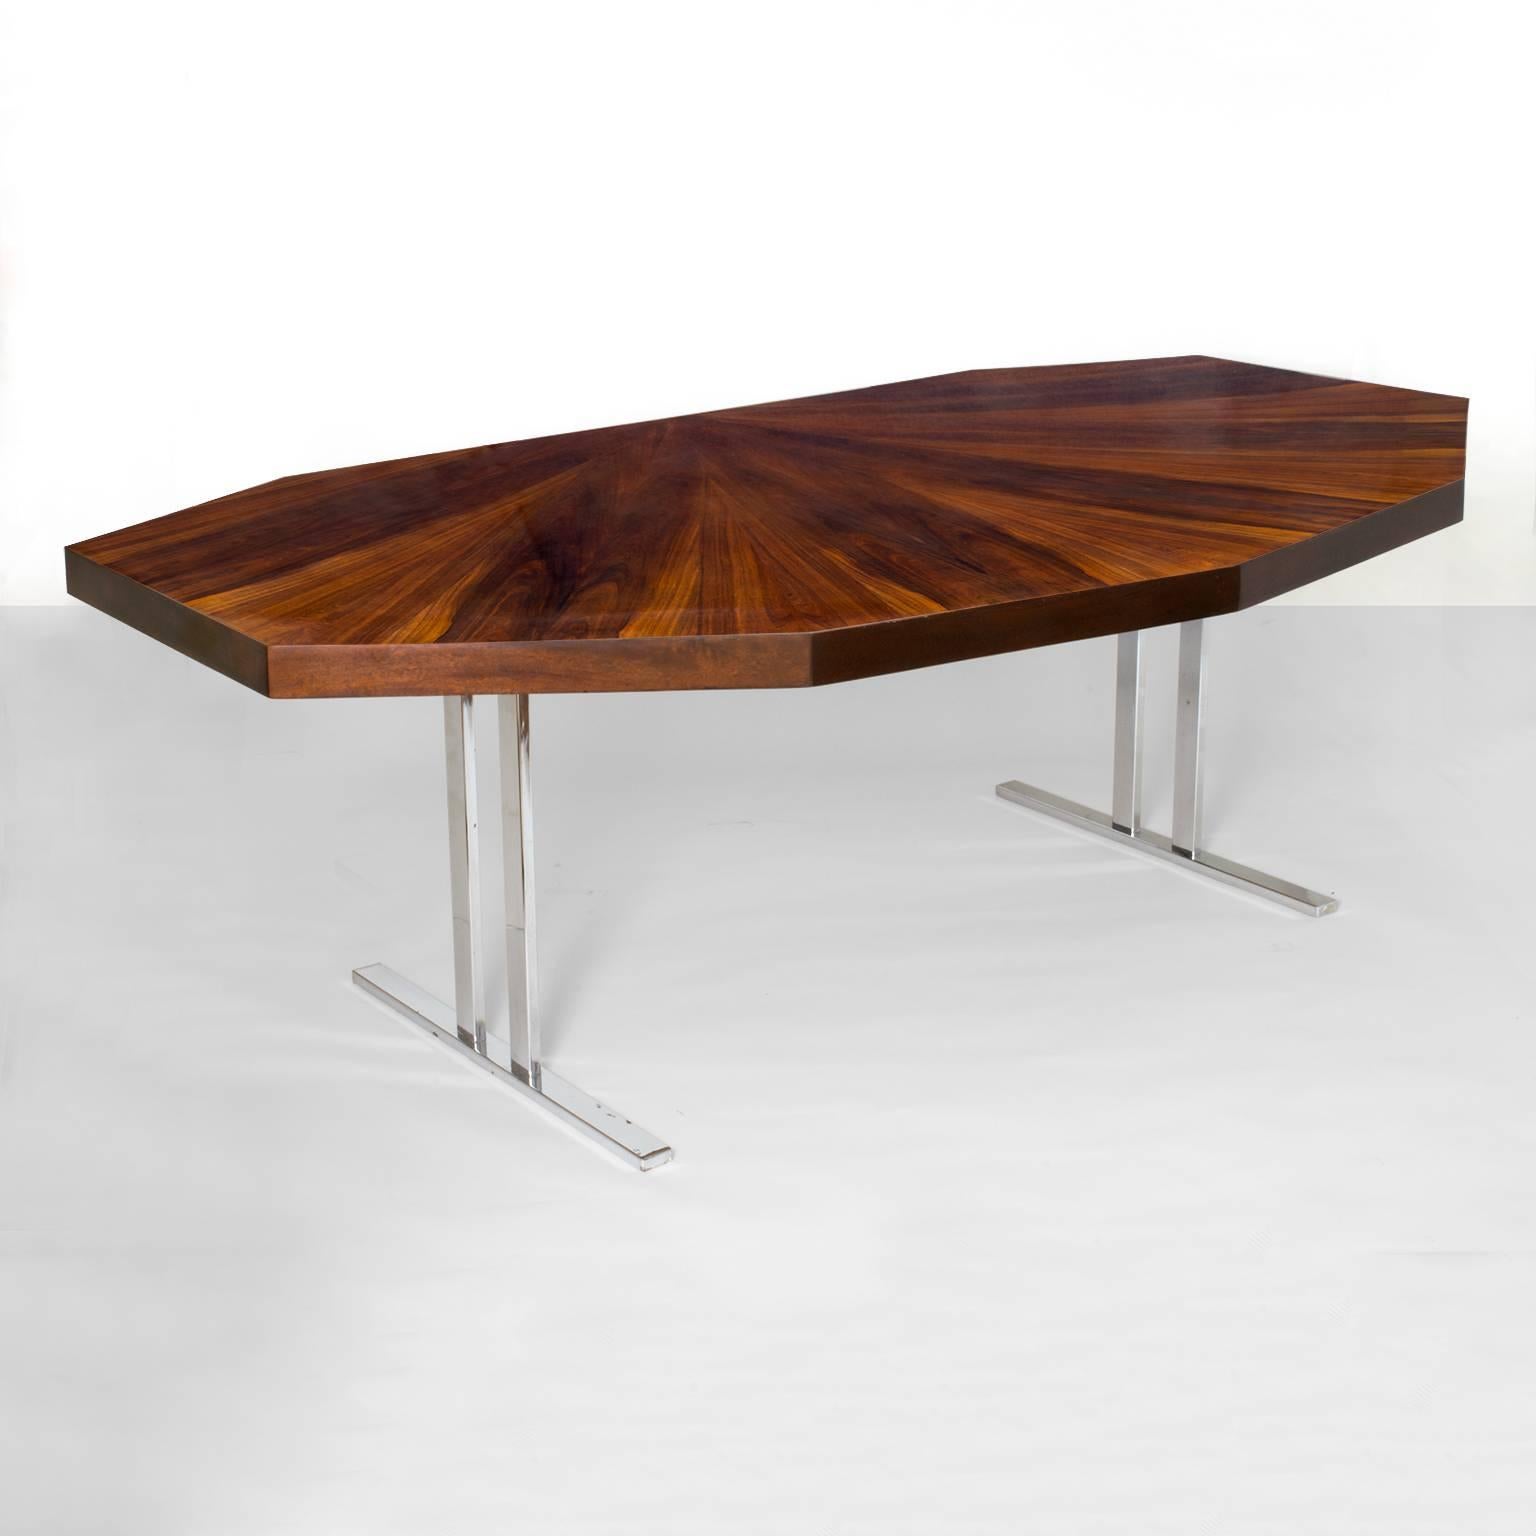 Plated Scandinavian Modern Rosewood Dining Table with Nine Angled Sides on Chrome Legs 